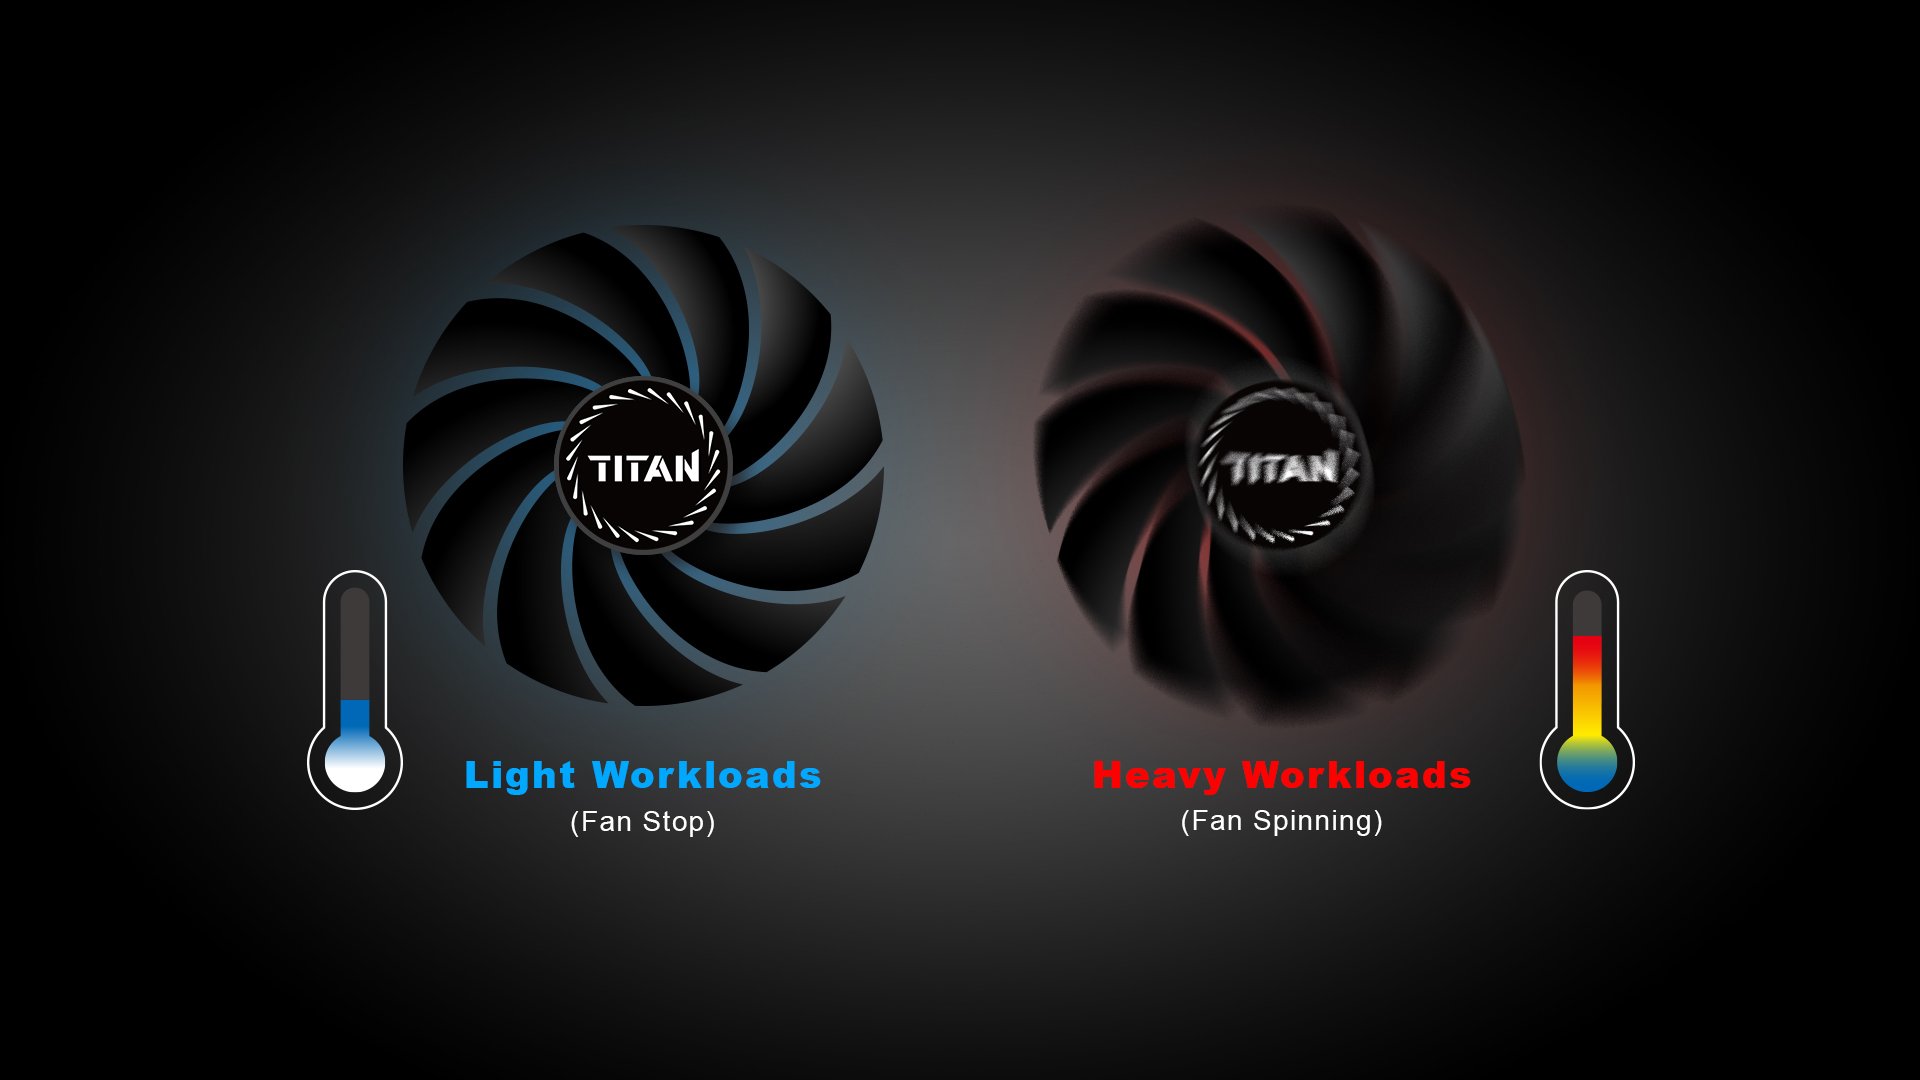 How fan works under different temperature